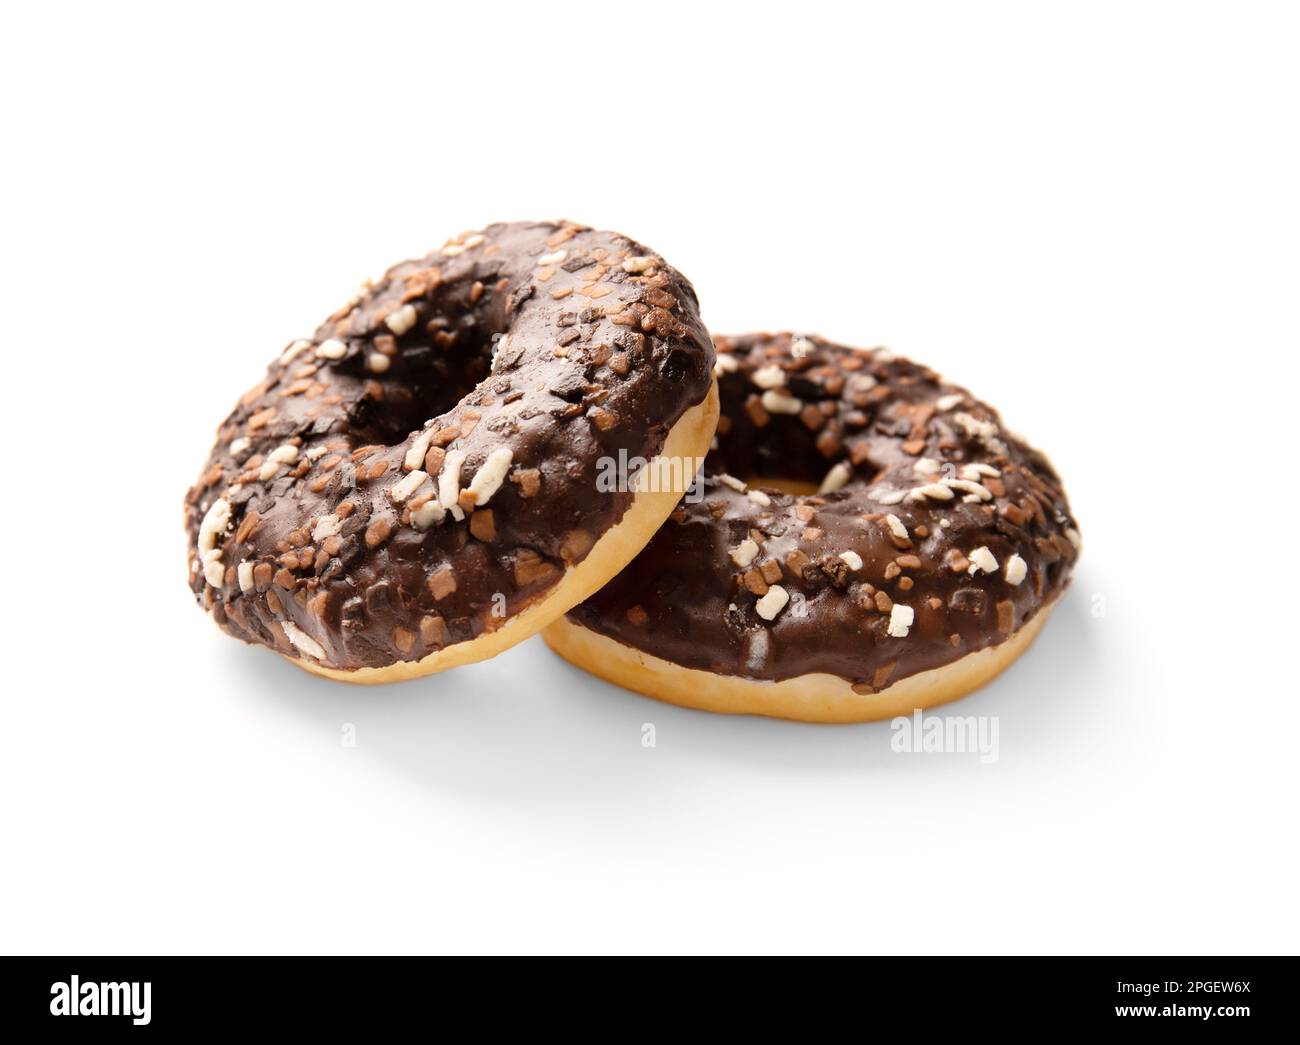 Donuts in chocolate isolated. Sweet breakfast. Dessert. Junk food. Two chocolate donuts on a white background. Stock Photo